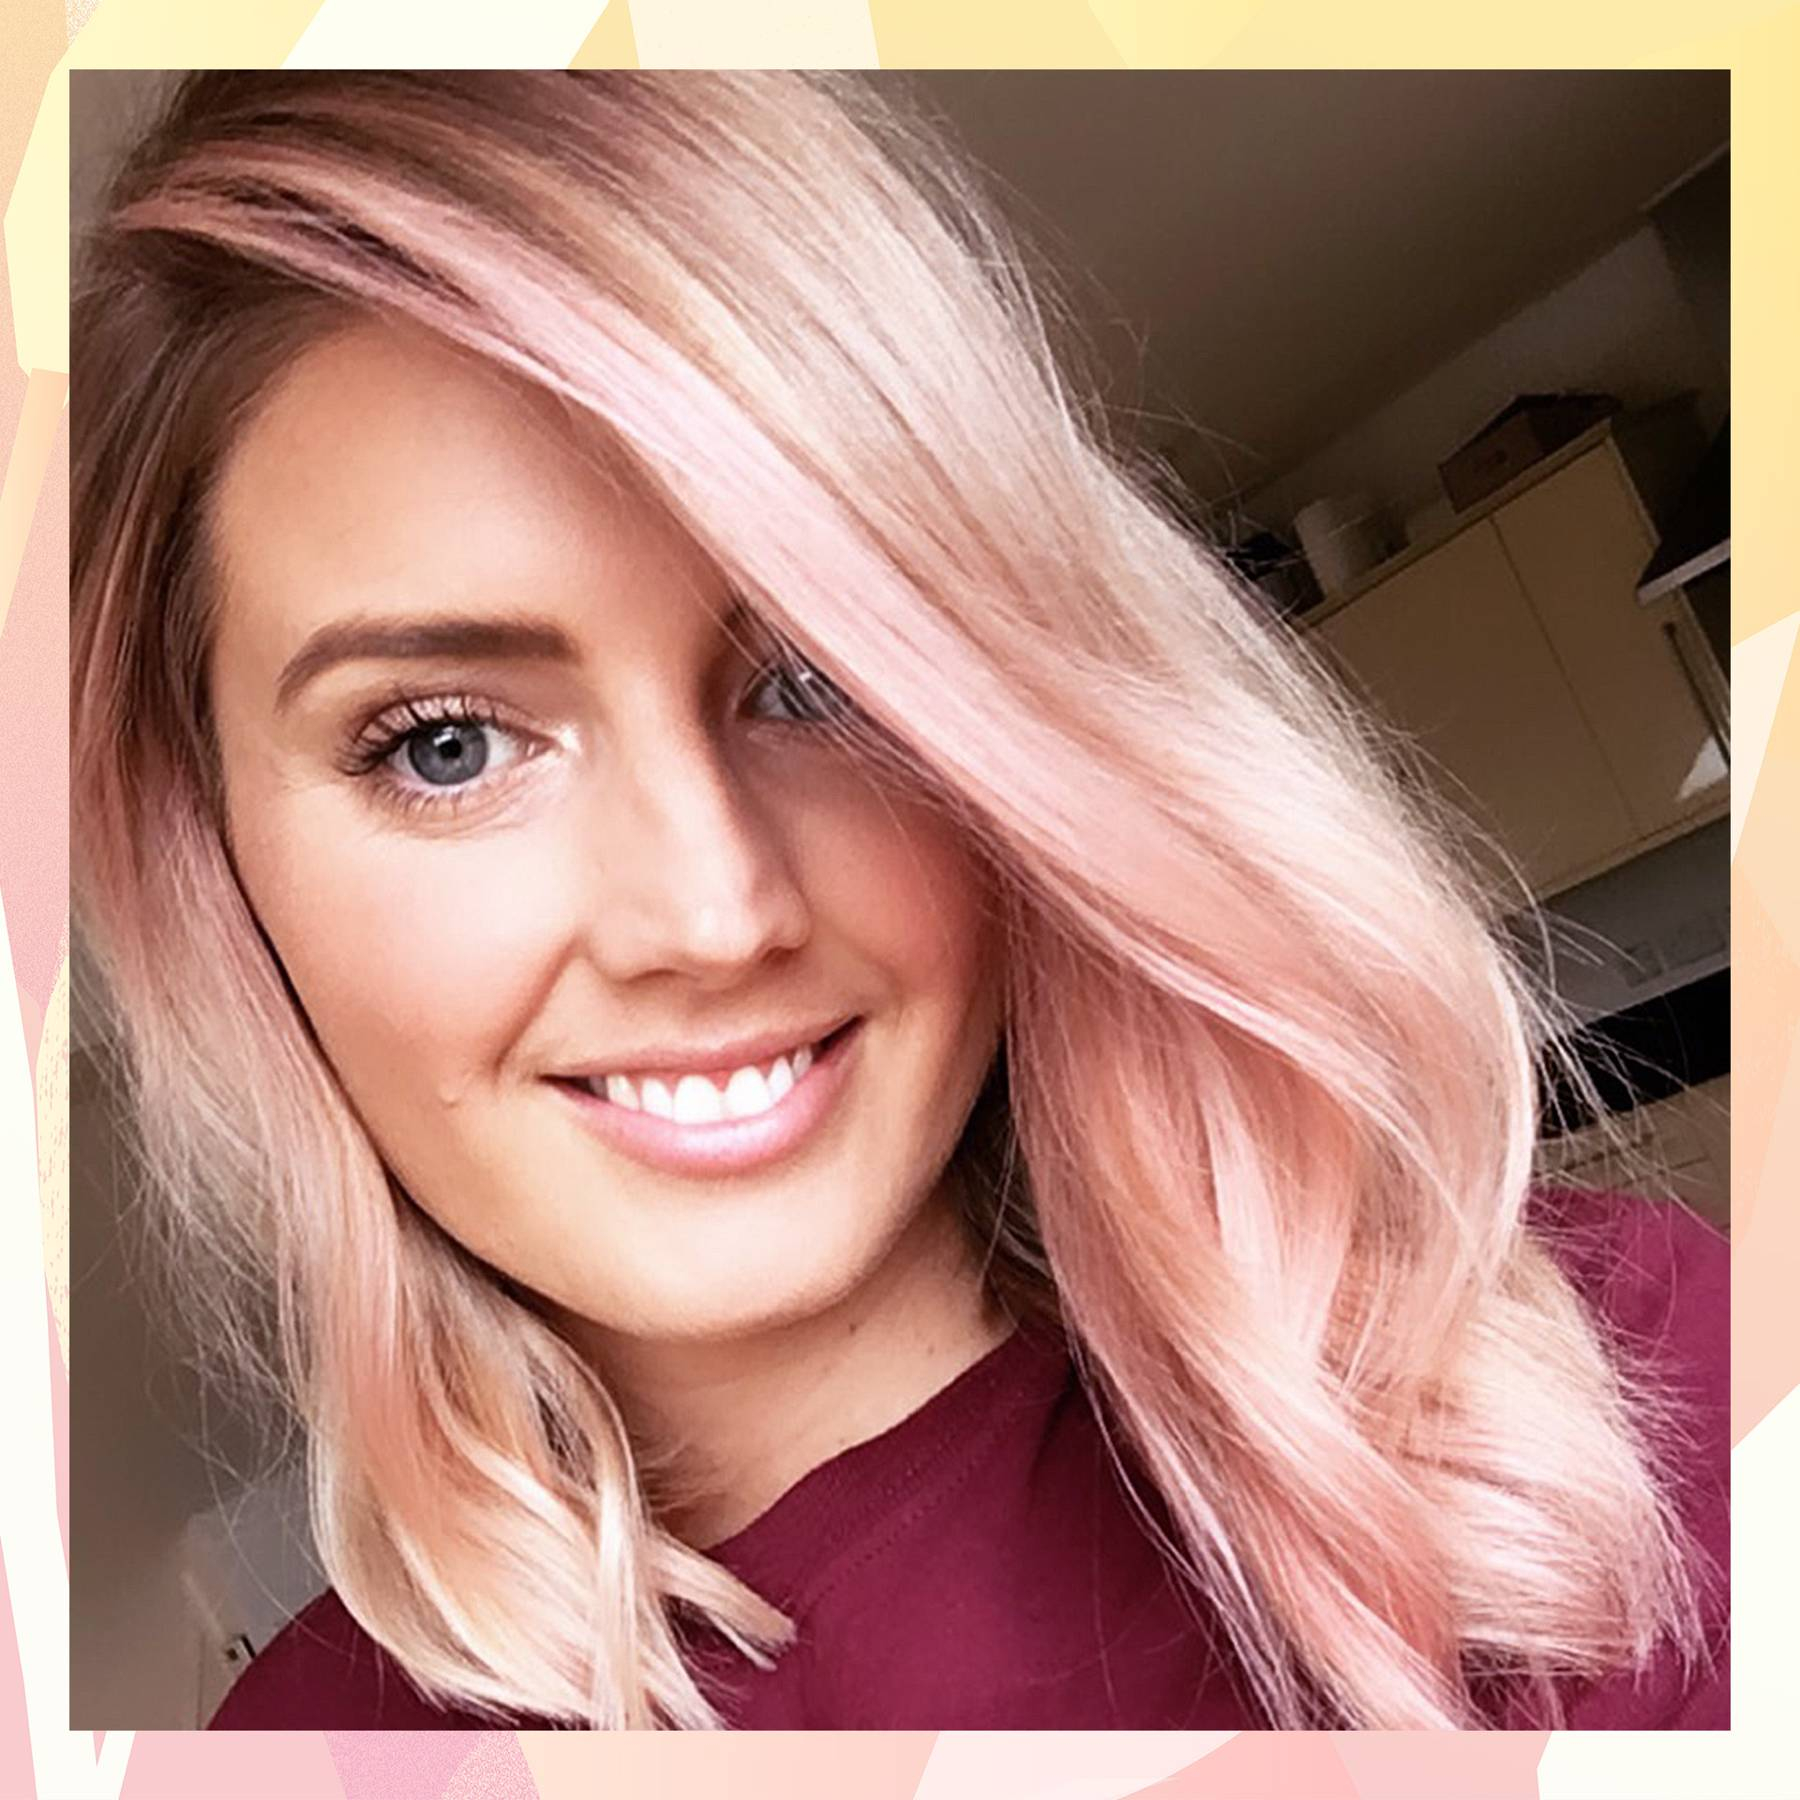 Makeup For Grey Hair And Green Eyes Rose Gold Hair Colour The Trend For The Perfect Pink Hair Shades